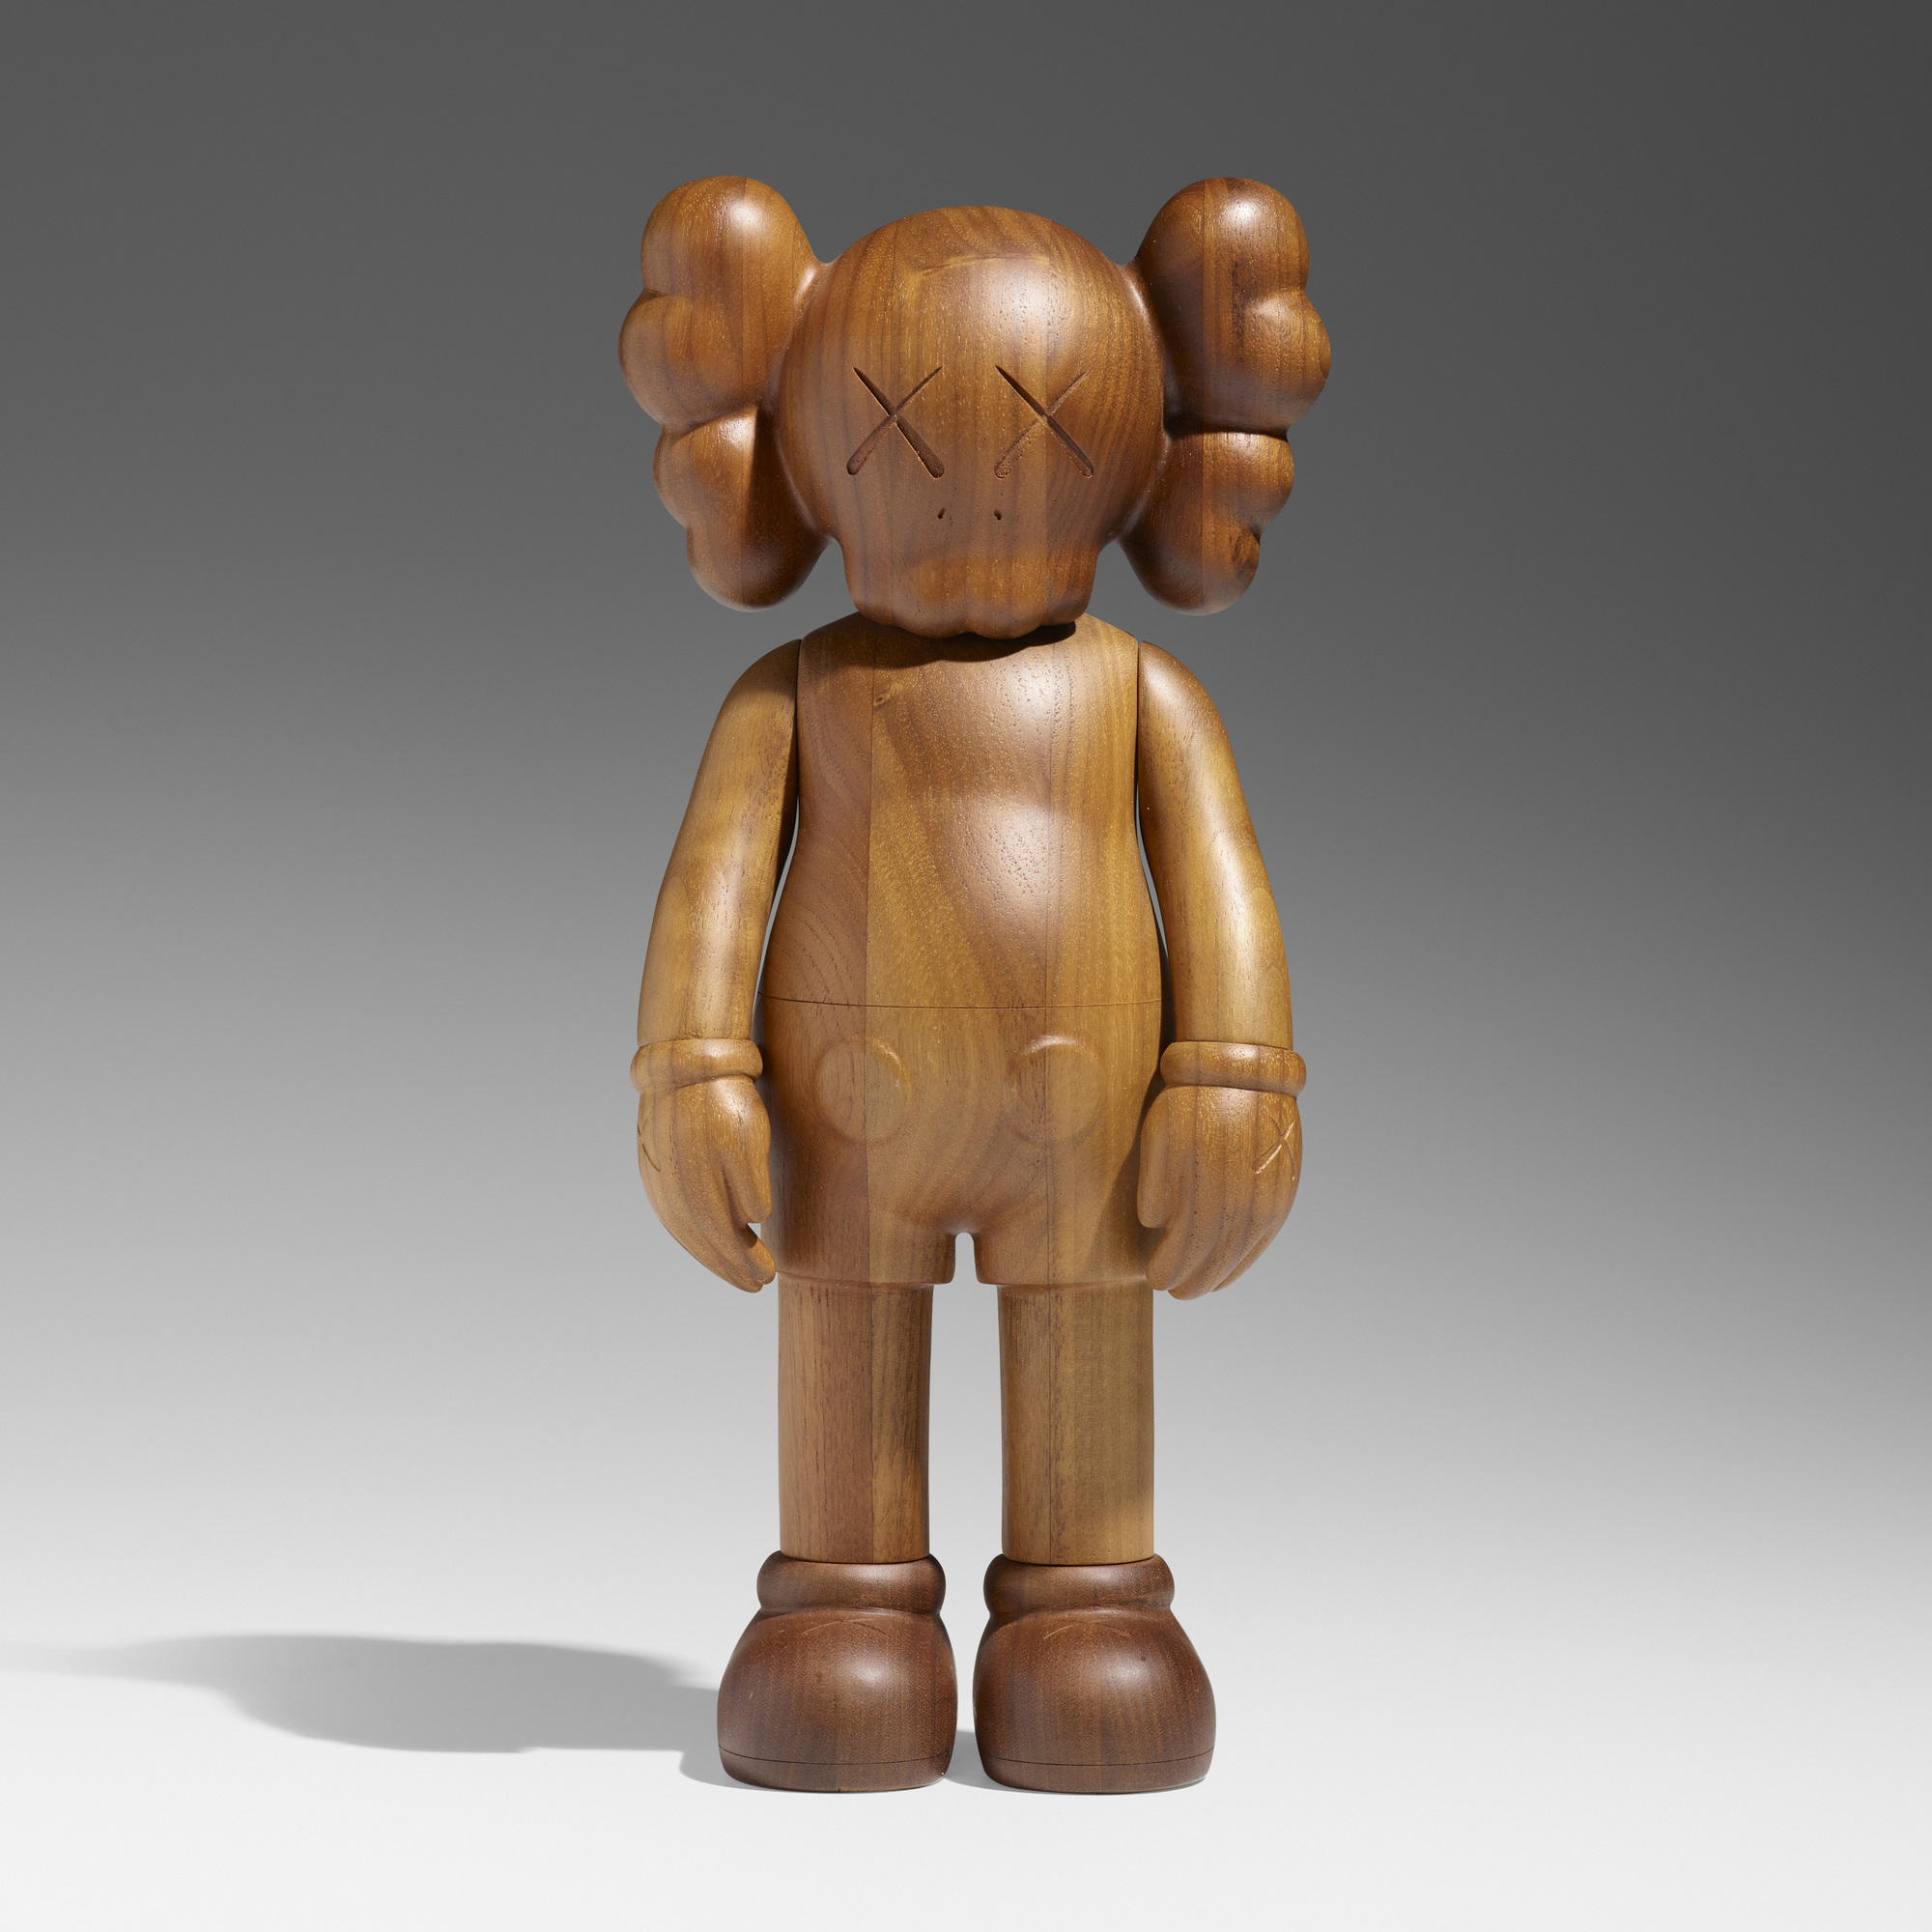 112: KAWS (BRIAN DONNELLY), Companion (Karimoku Version) < Curated 